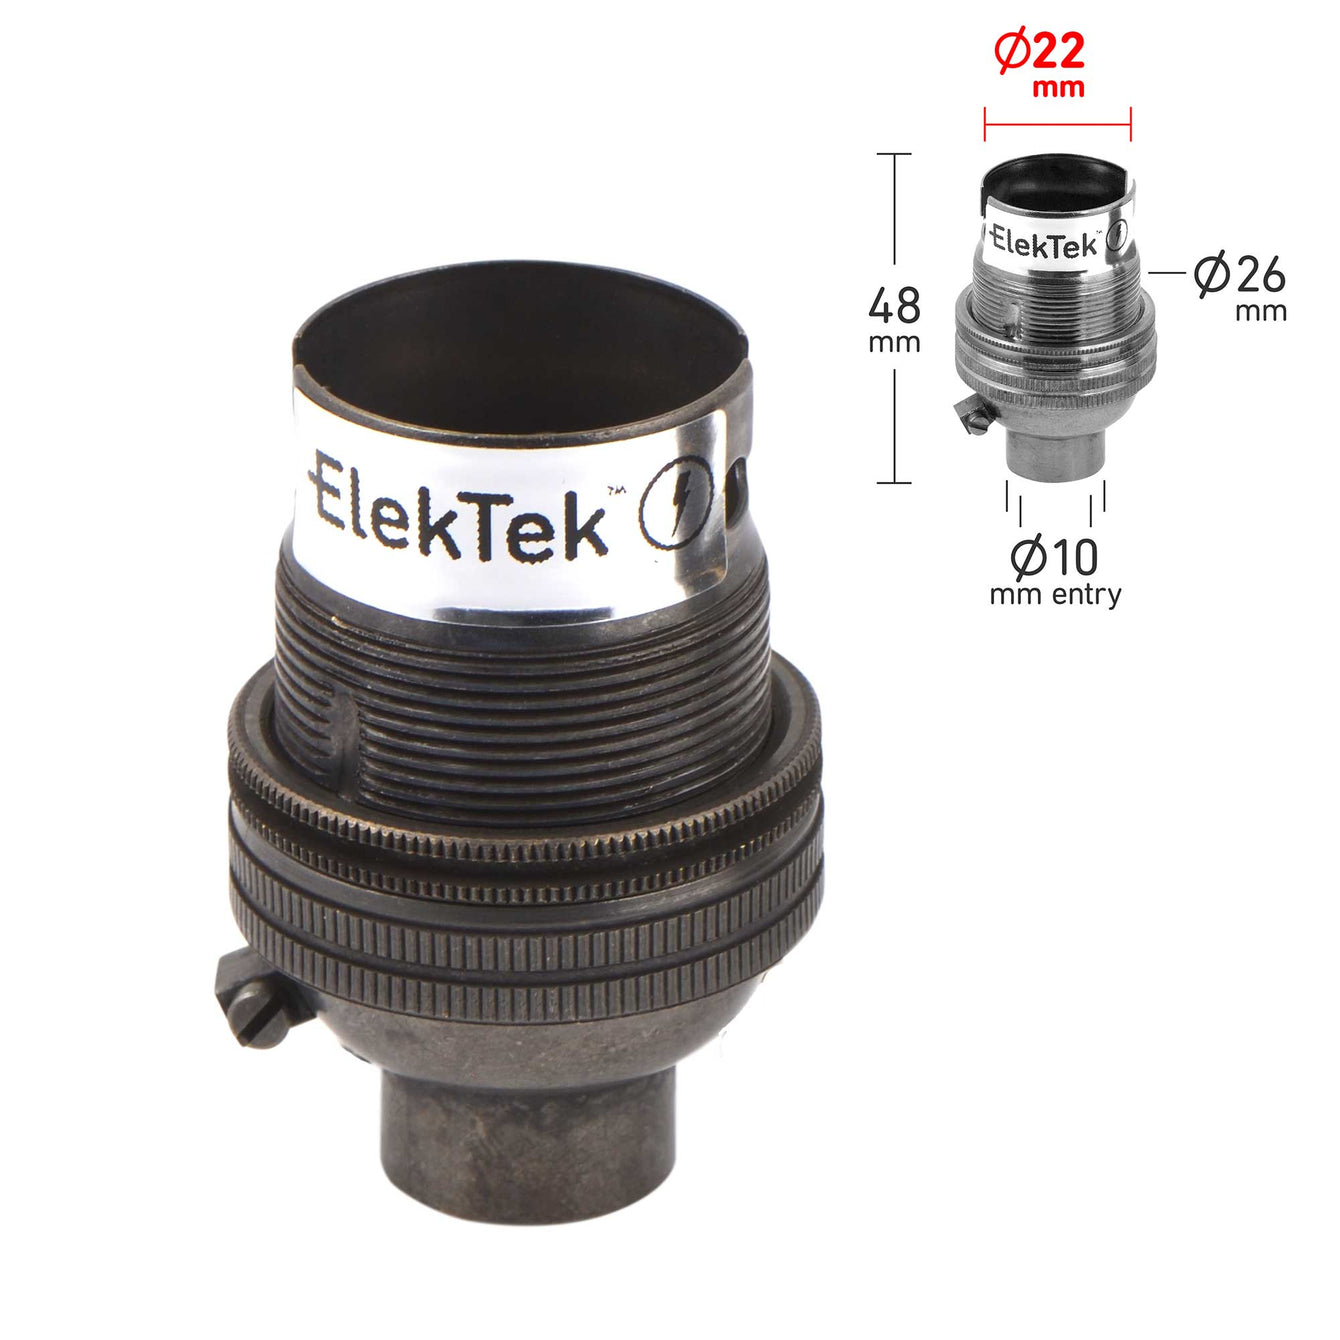 ElekTek Lamp Holder Bayonet Cap B22 Unswitched 10mm or Half Inch Entry With Shade Ring Solid Brass - Buy It Better Chrome / Half Inch